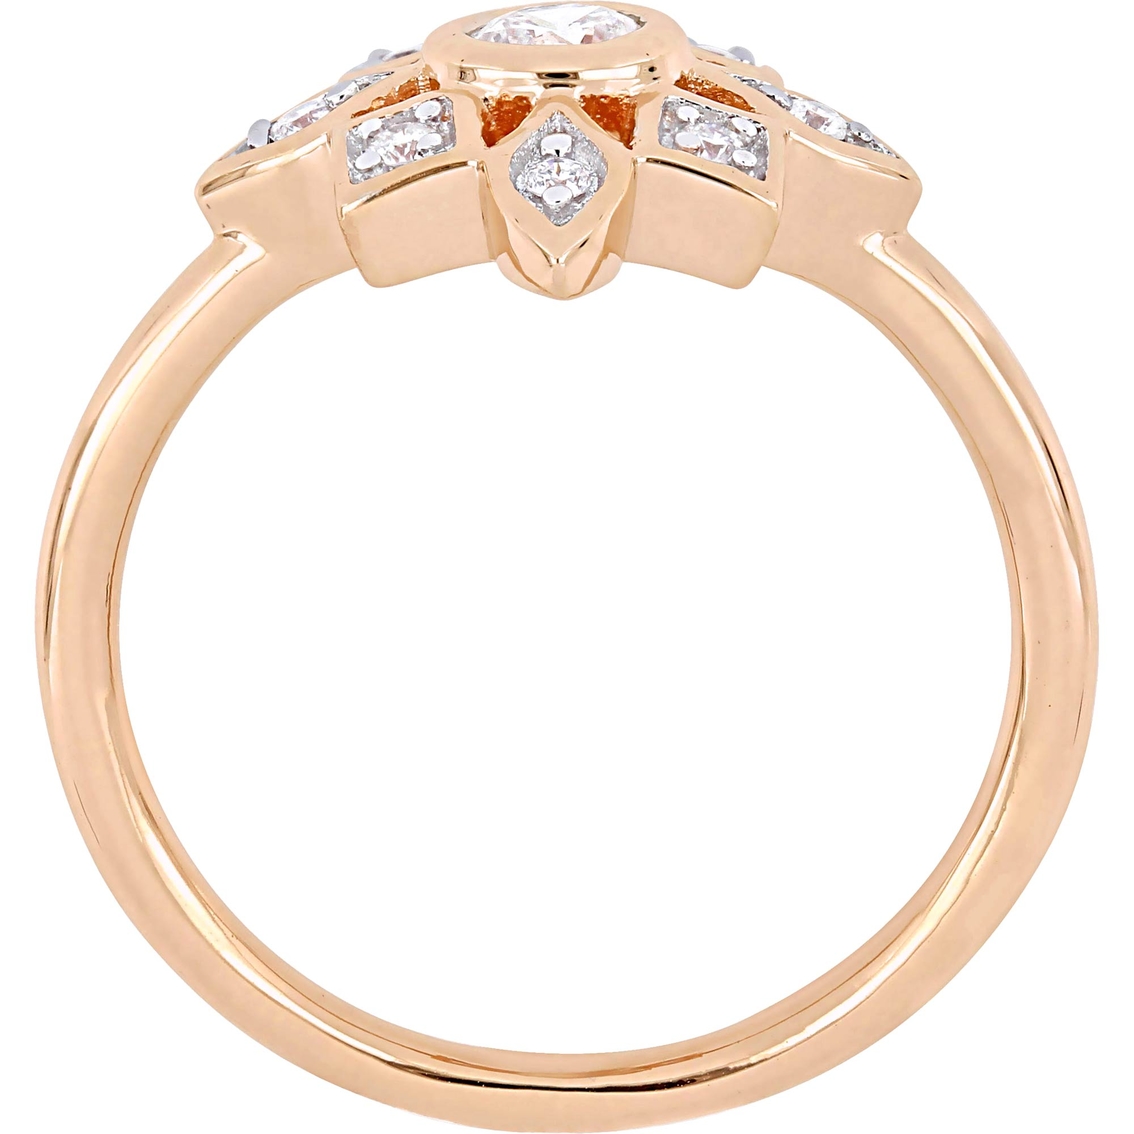 Diamore 10K Rose Gold 1/3 CTW Diamond Floral Ring - Image 3 of 4